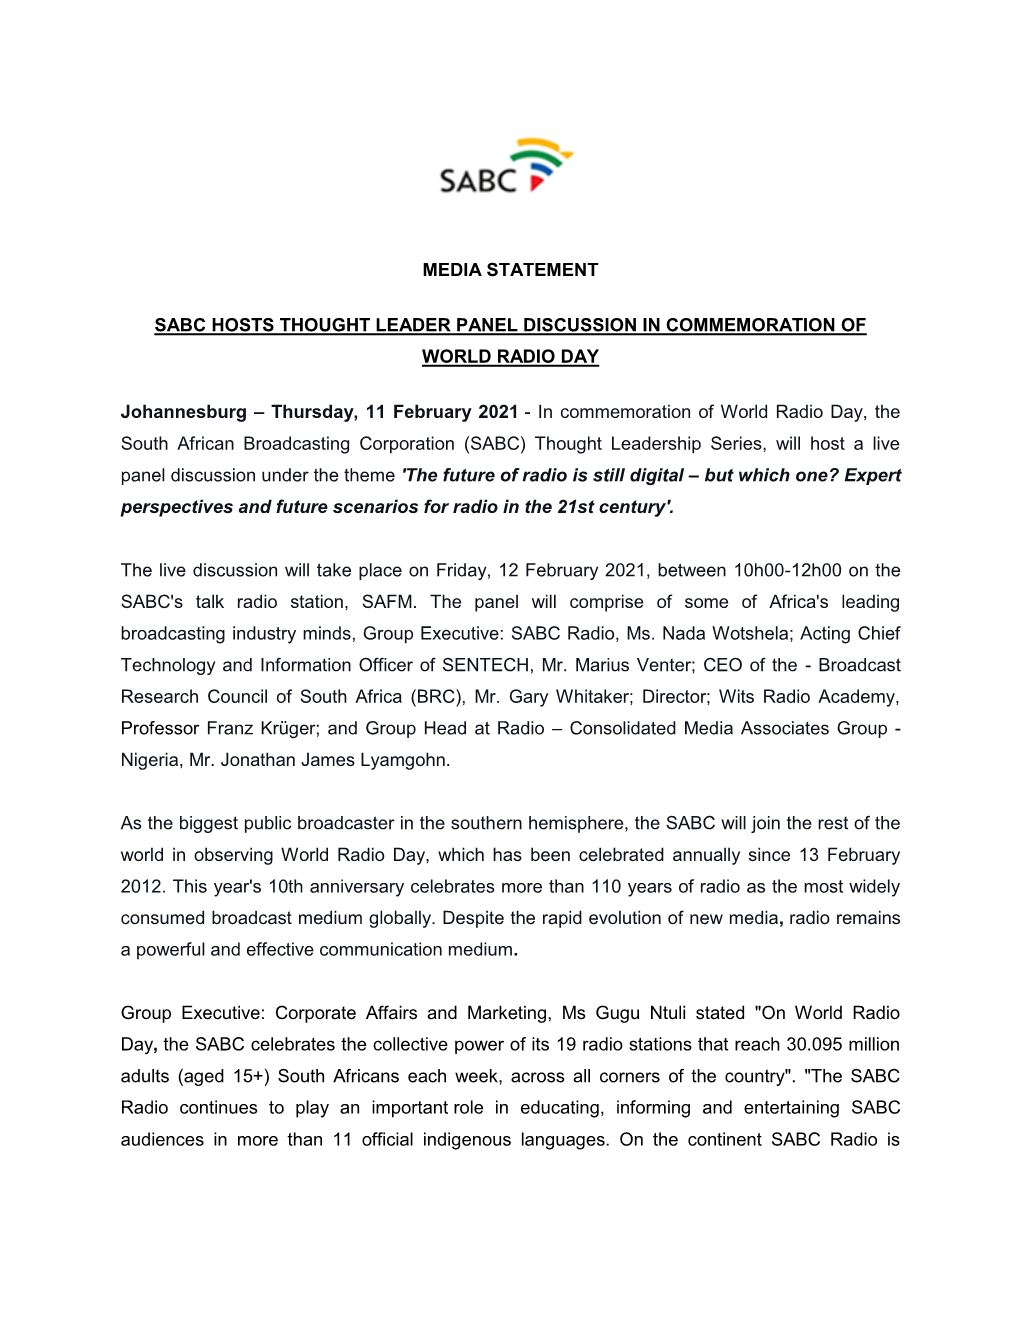 MEDIA STATEMENT SABC HOSTS THOUGHT LEADER PANEL DISCUSSION in COMMEMORATION of WORLD RADIO DAY Johannesburg – Thursday, 11